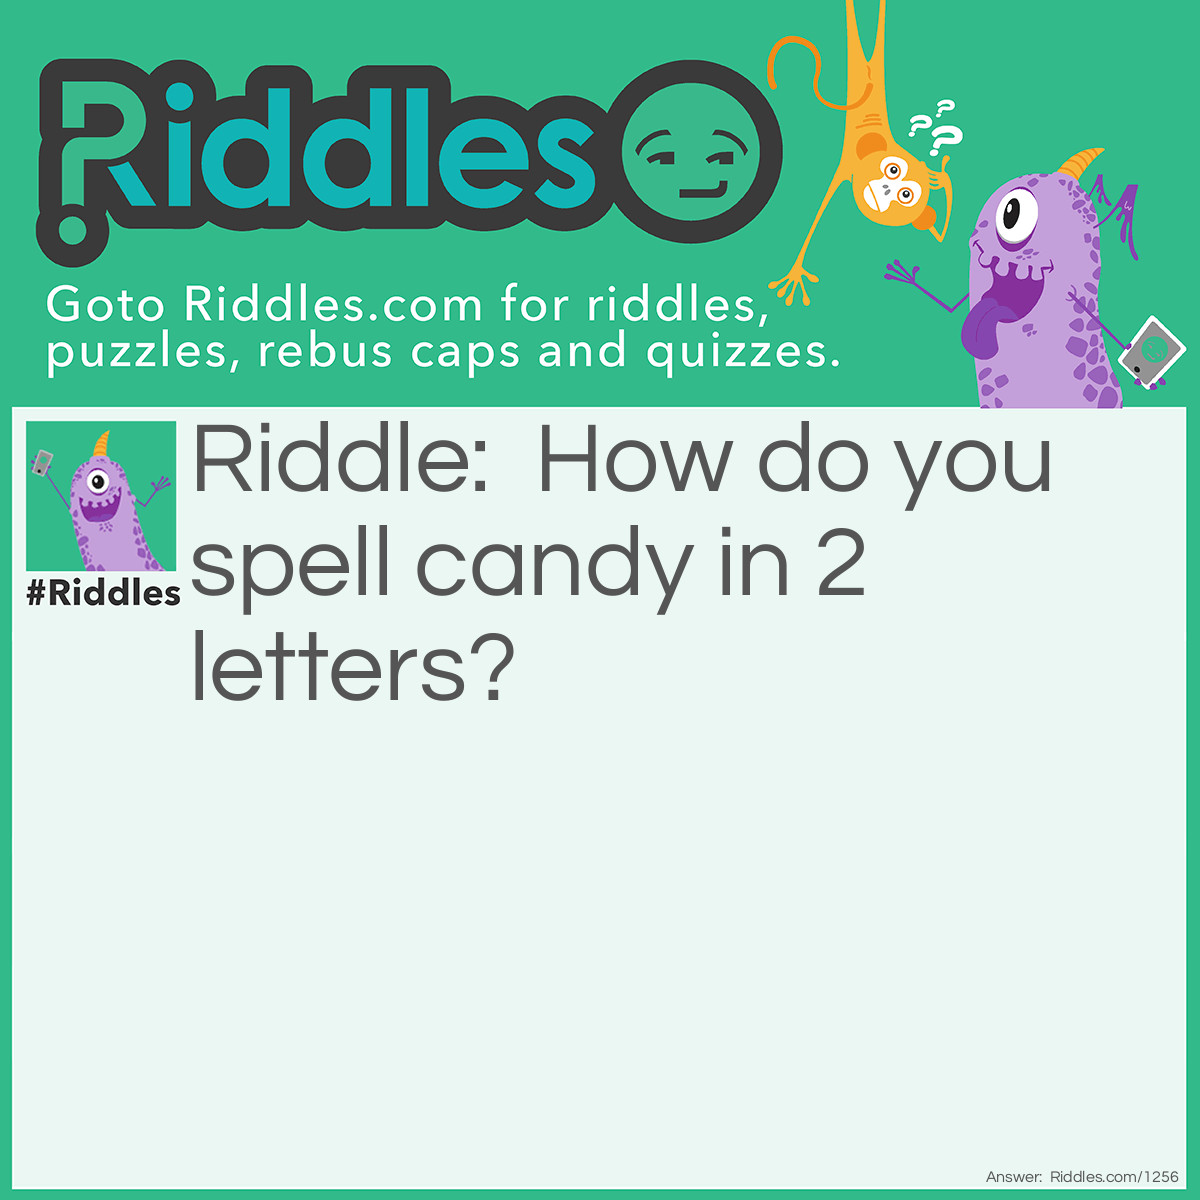 Riddle: How do you spell candy in 2 letters? Answer: c and y c(and)y.